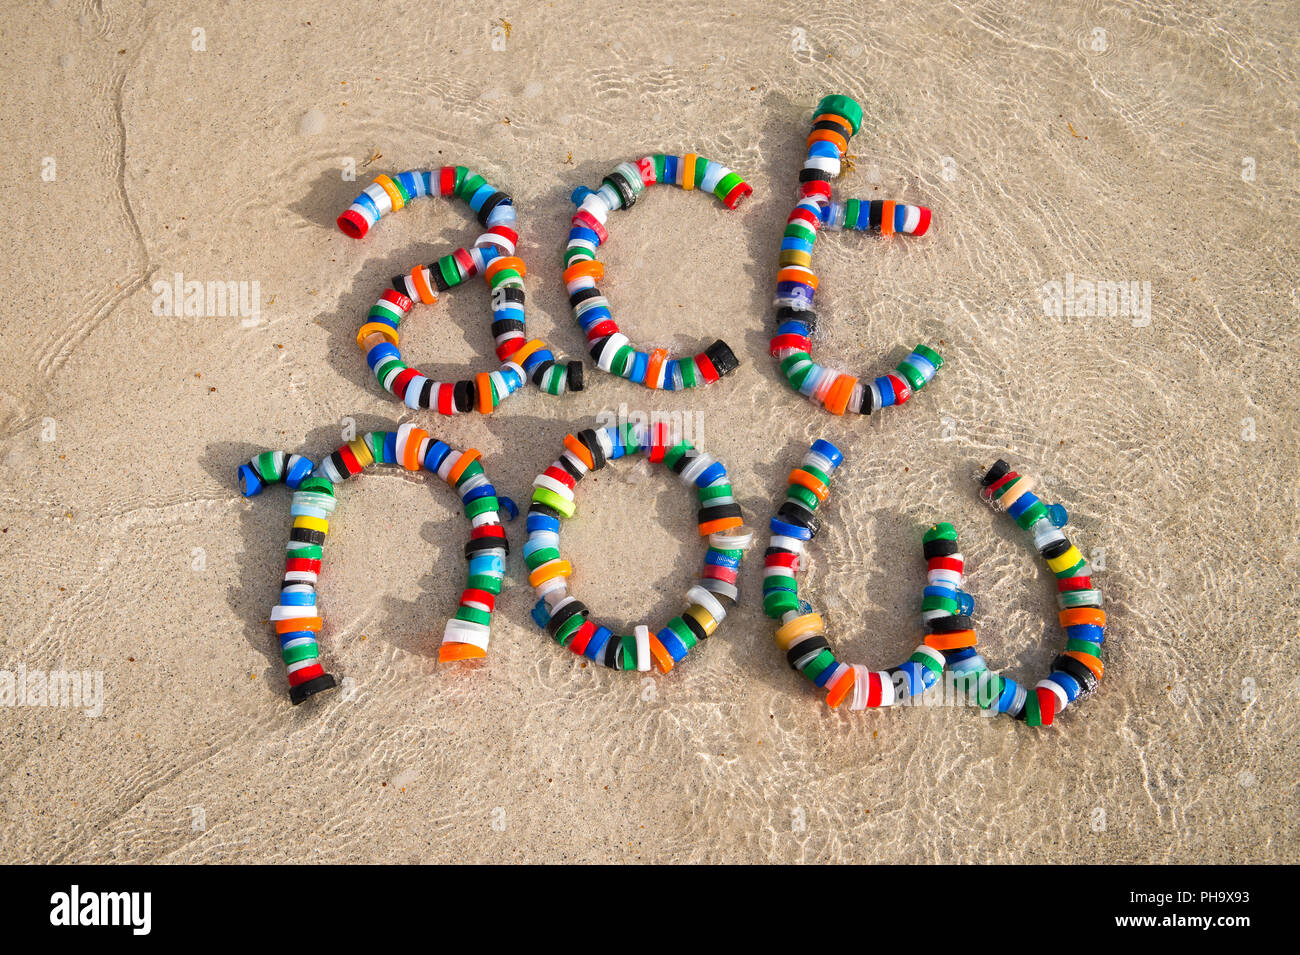 Colorful plastic bottle caps spell out 'act now' on a sandy beach as a wave laps around. Take action on pollution - reduce, reuse and recycle Stock Photo